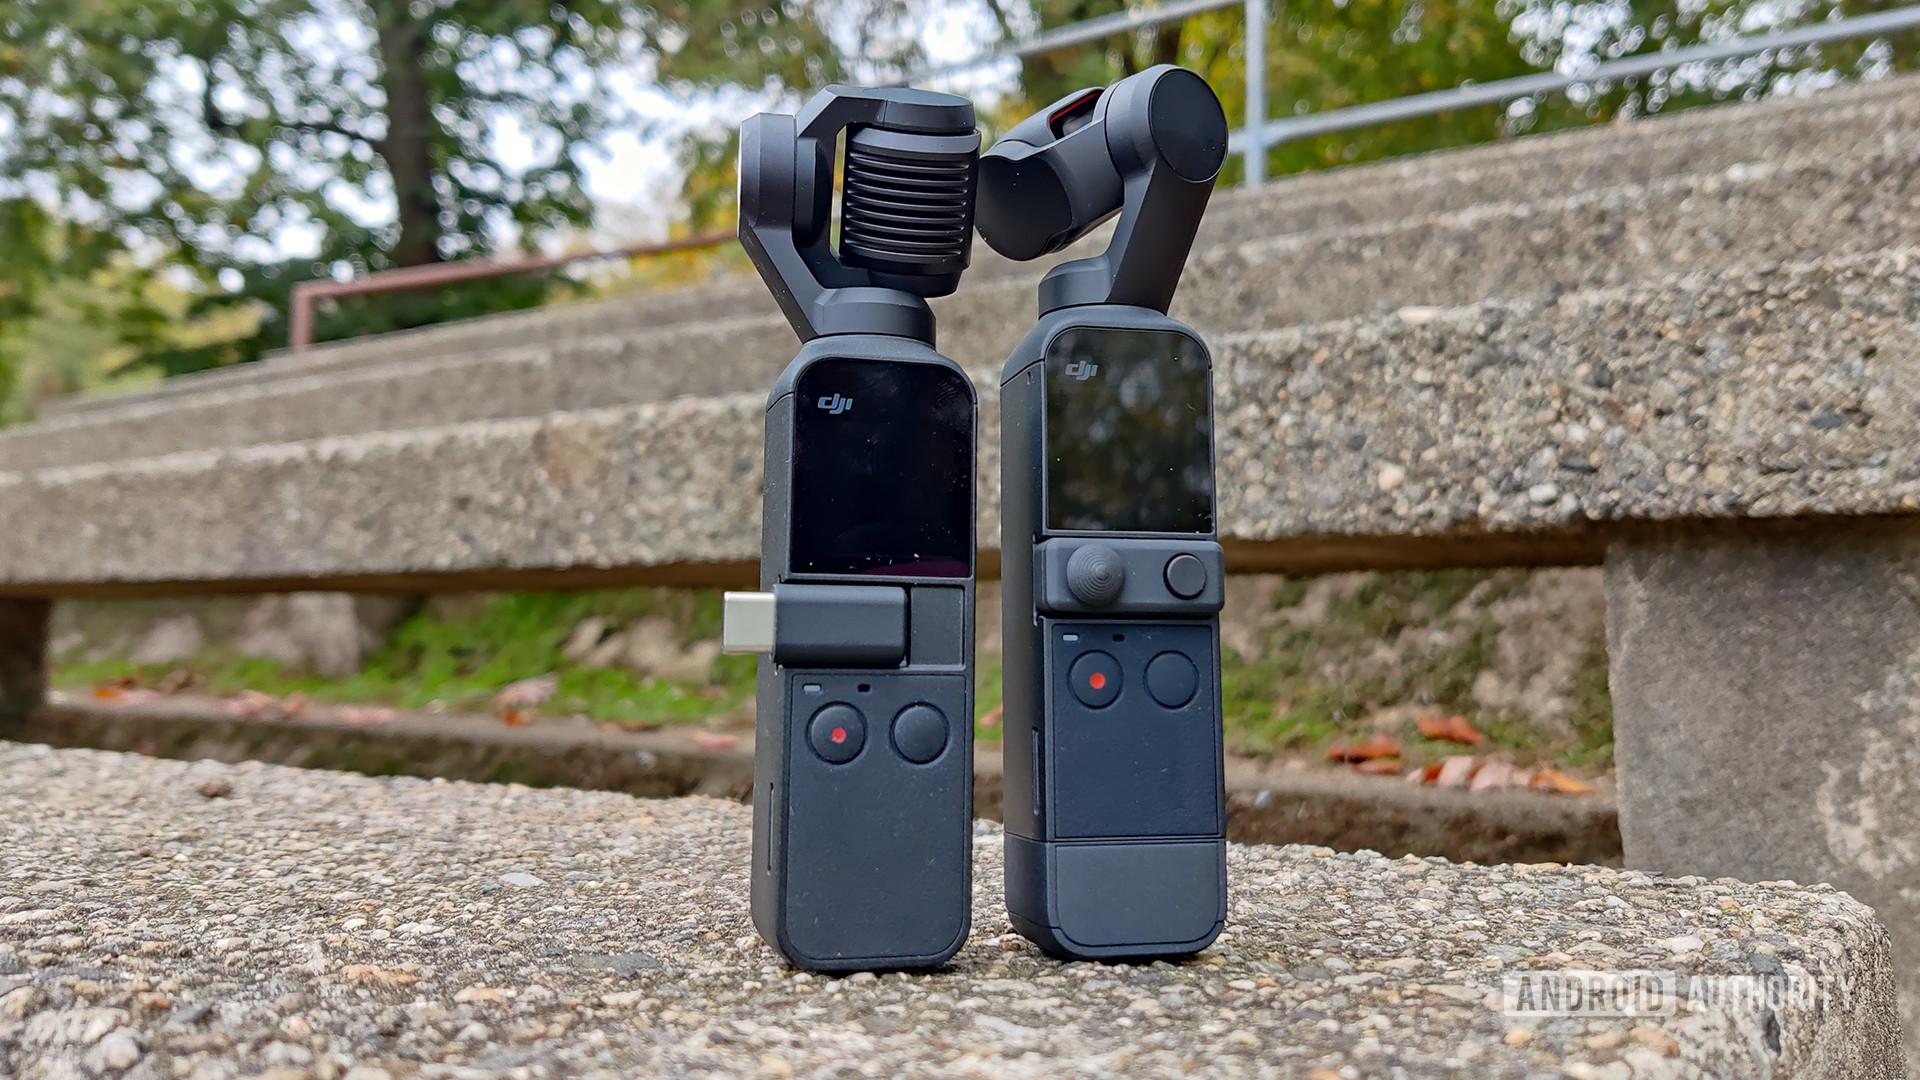 DJI Pocket review: Better than the original Android Authority